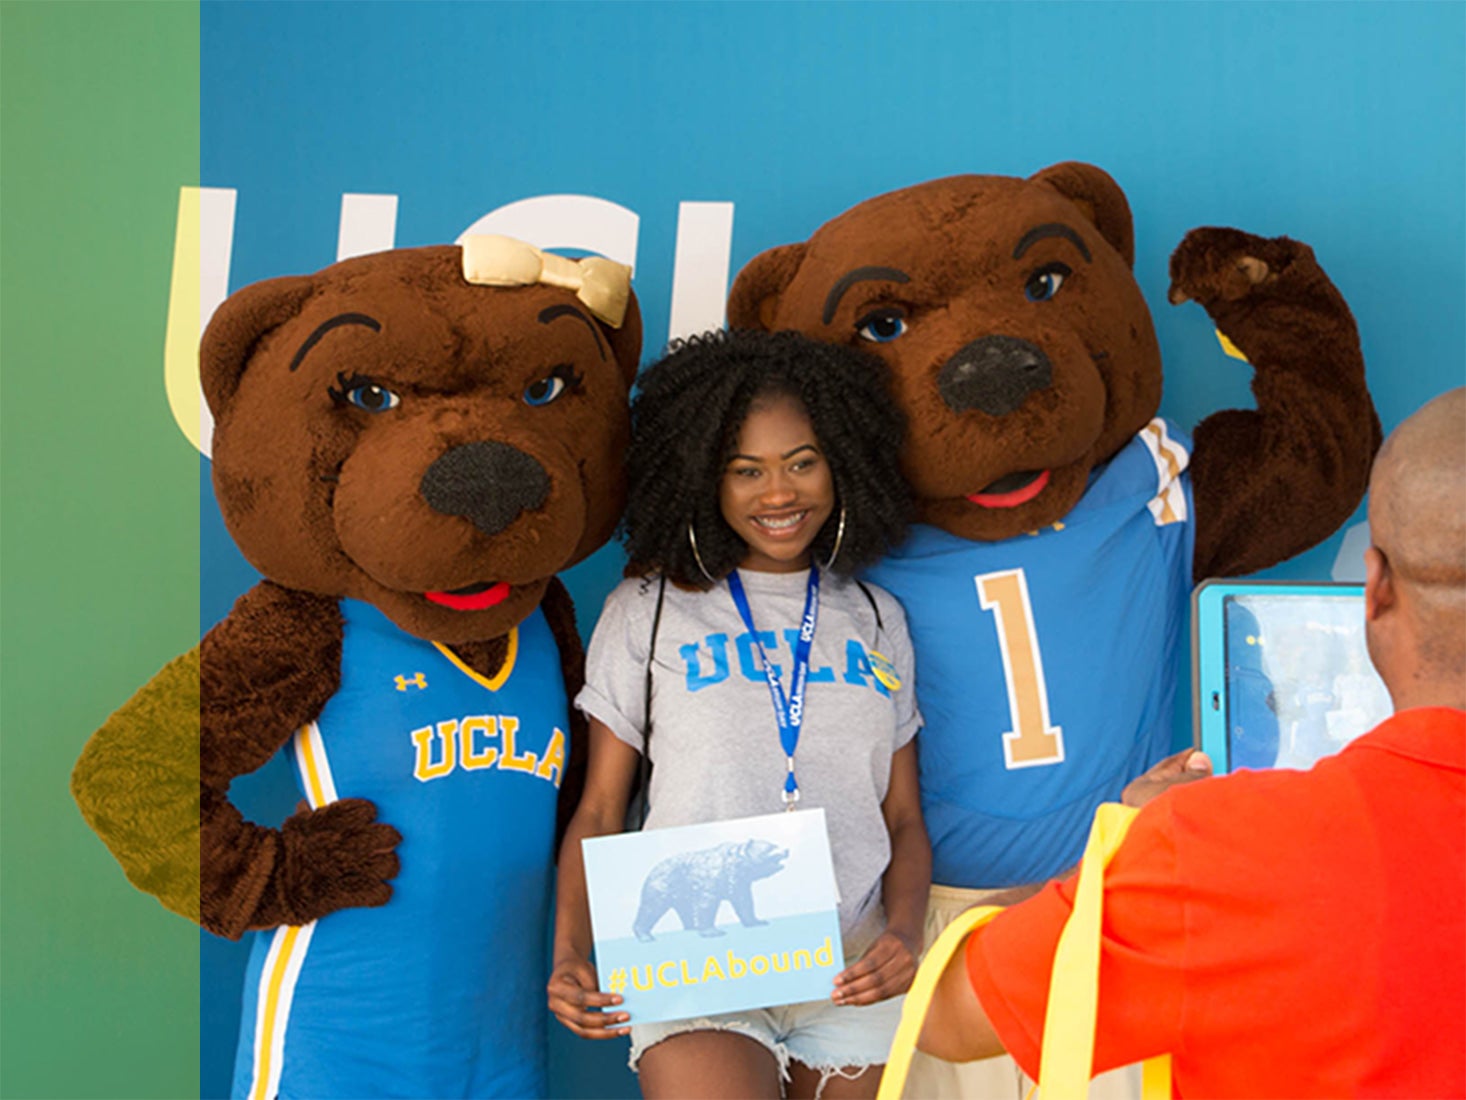 A female student holding a #UCLAbound sign poses with Joe and Josie Bruin.